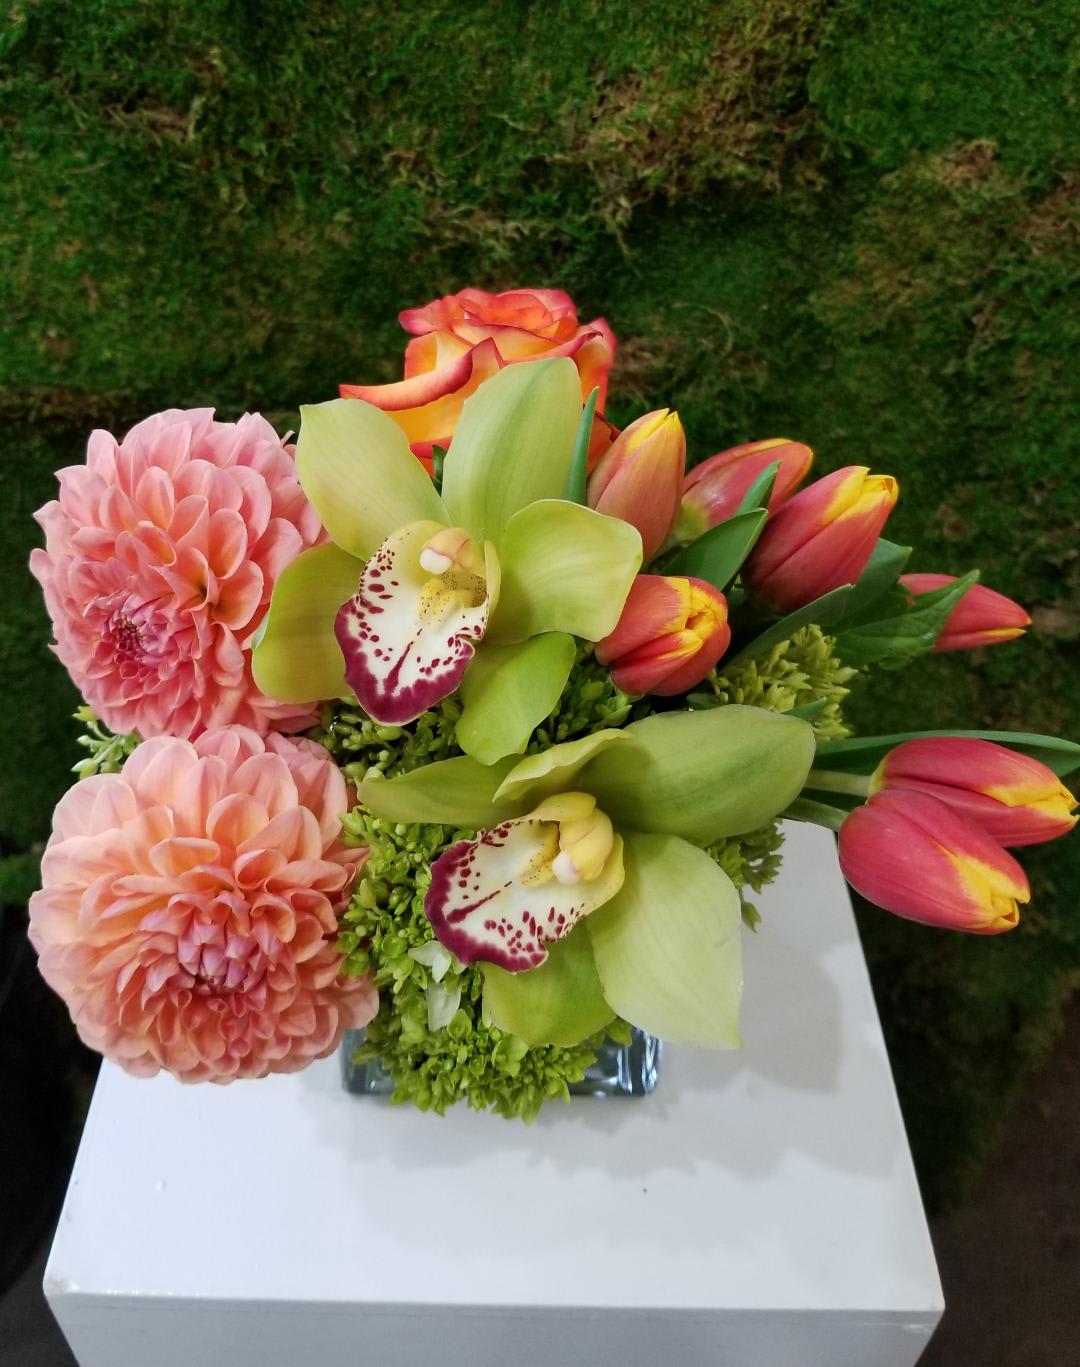 Tango in orange - Say hello with this fun and cheerful arrangement making anyone smile with it's mixture of Roses, Tulips, Orchids and Soft greens to accentuate it's fun character. 